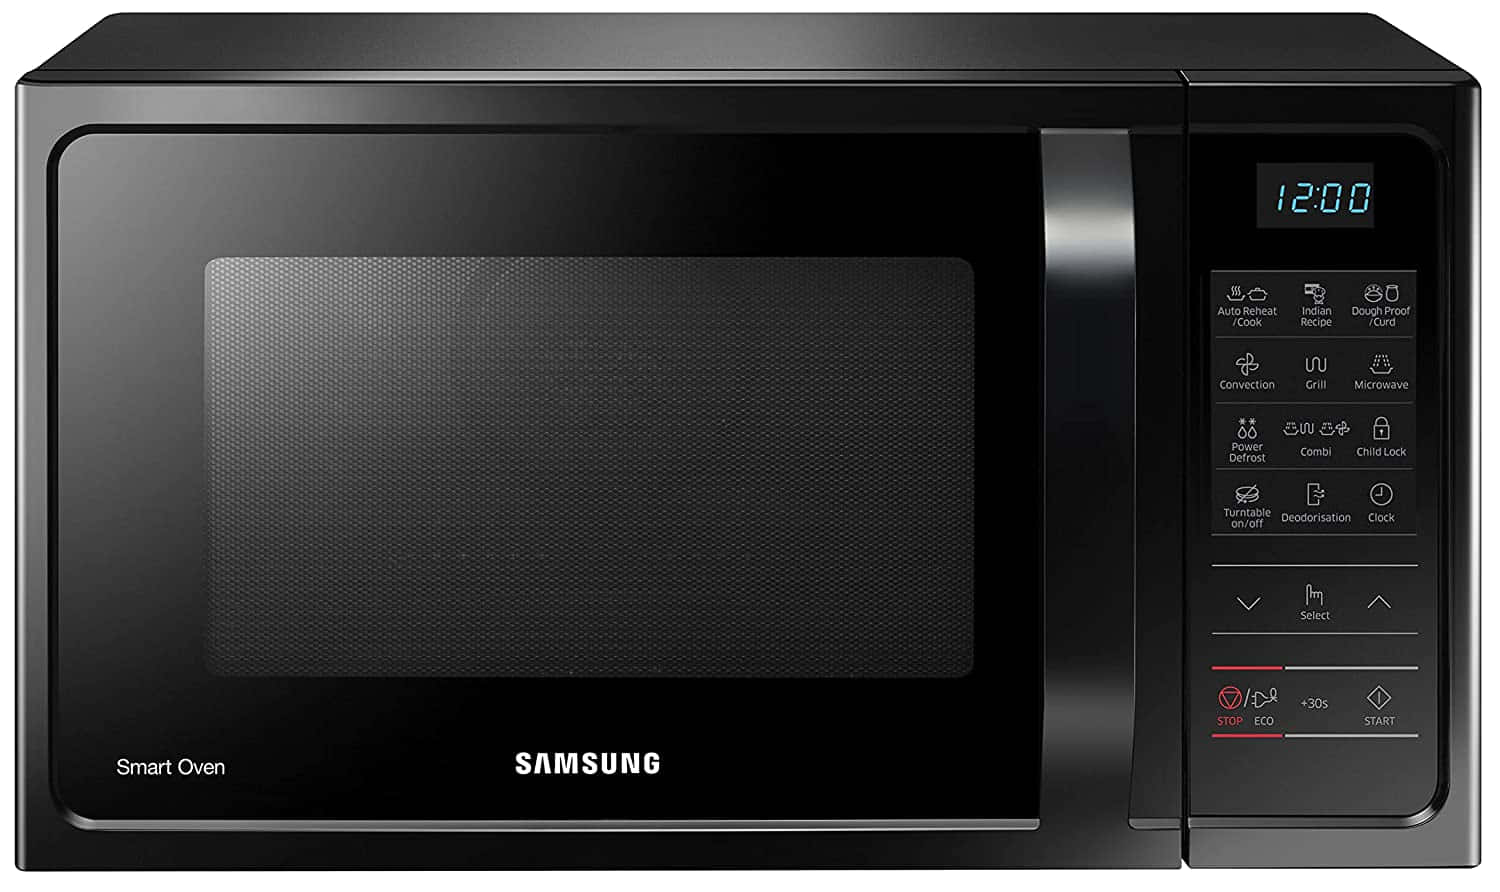 Samsung Oven Picture